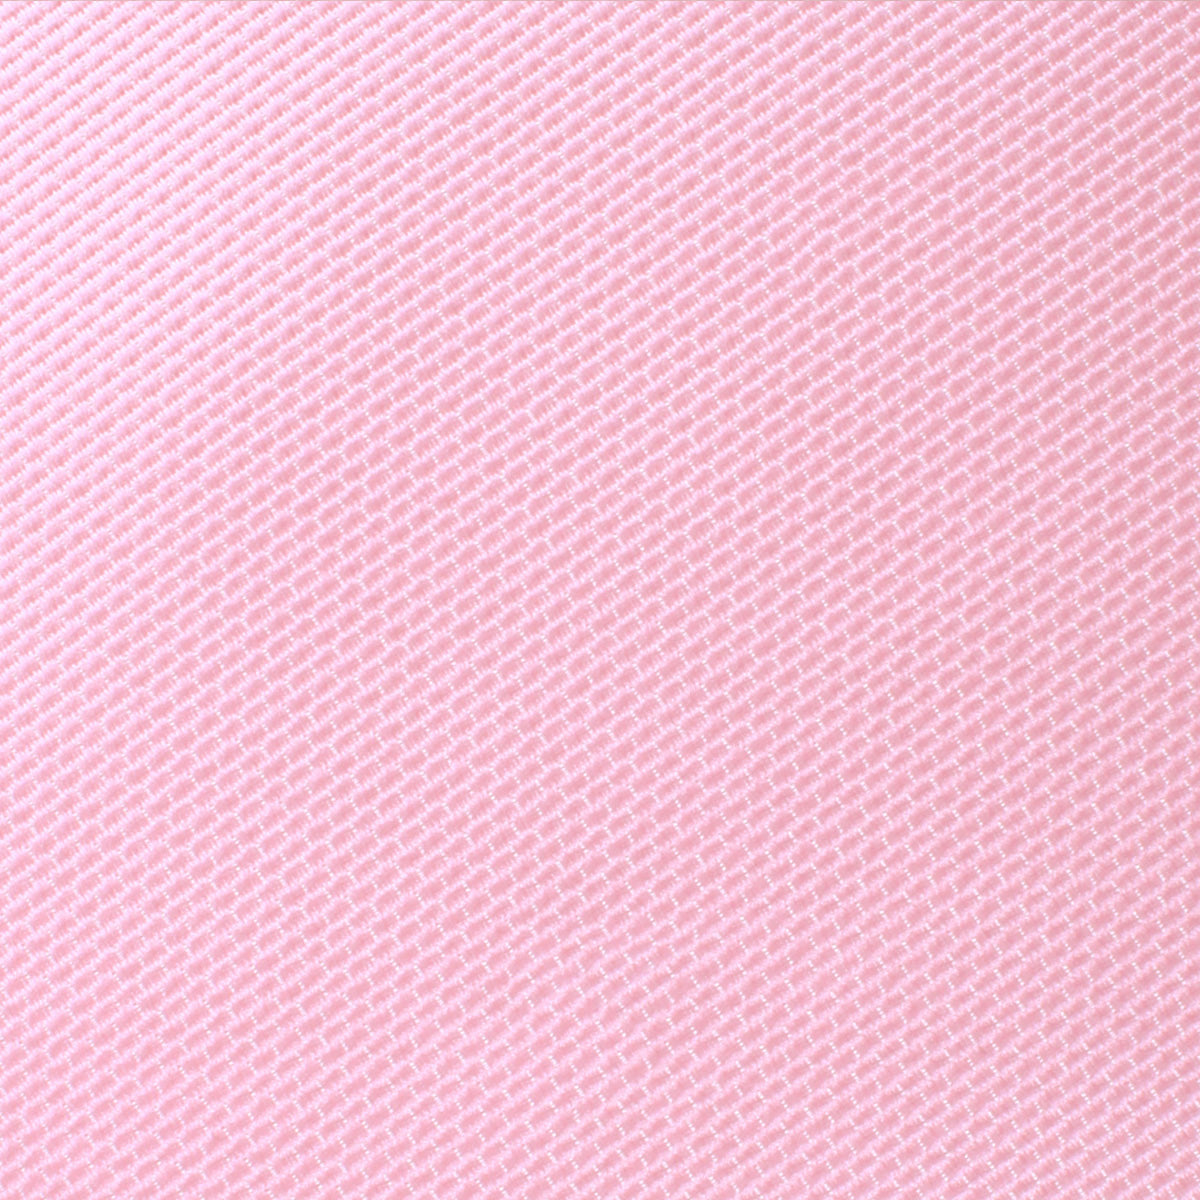 Tickled Pink Weave Kids Bow Tie Fabric